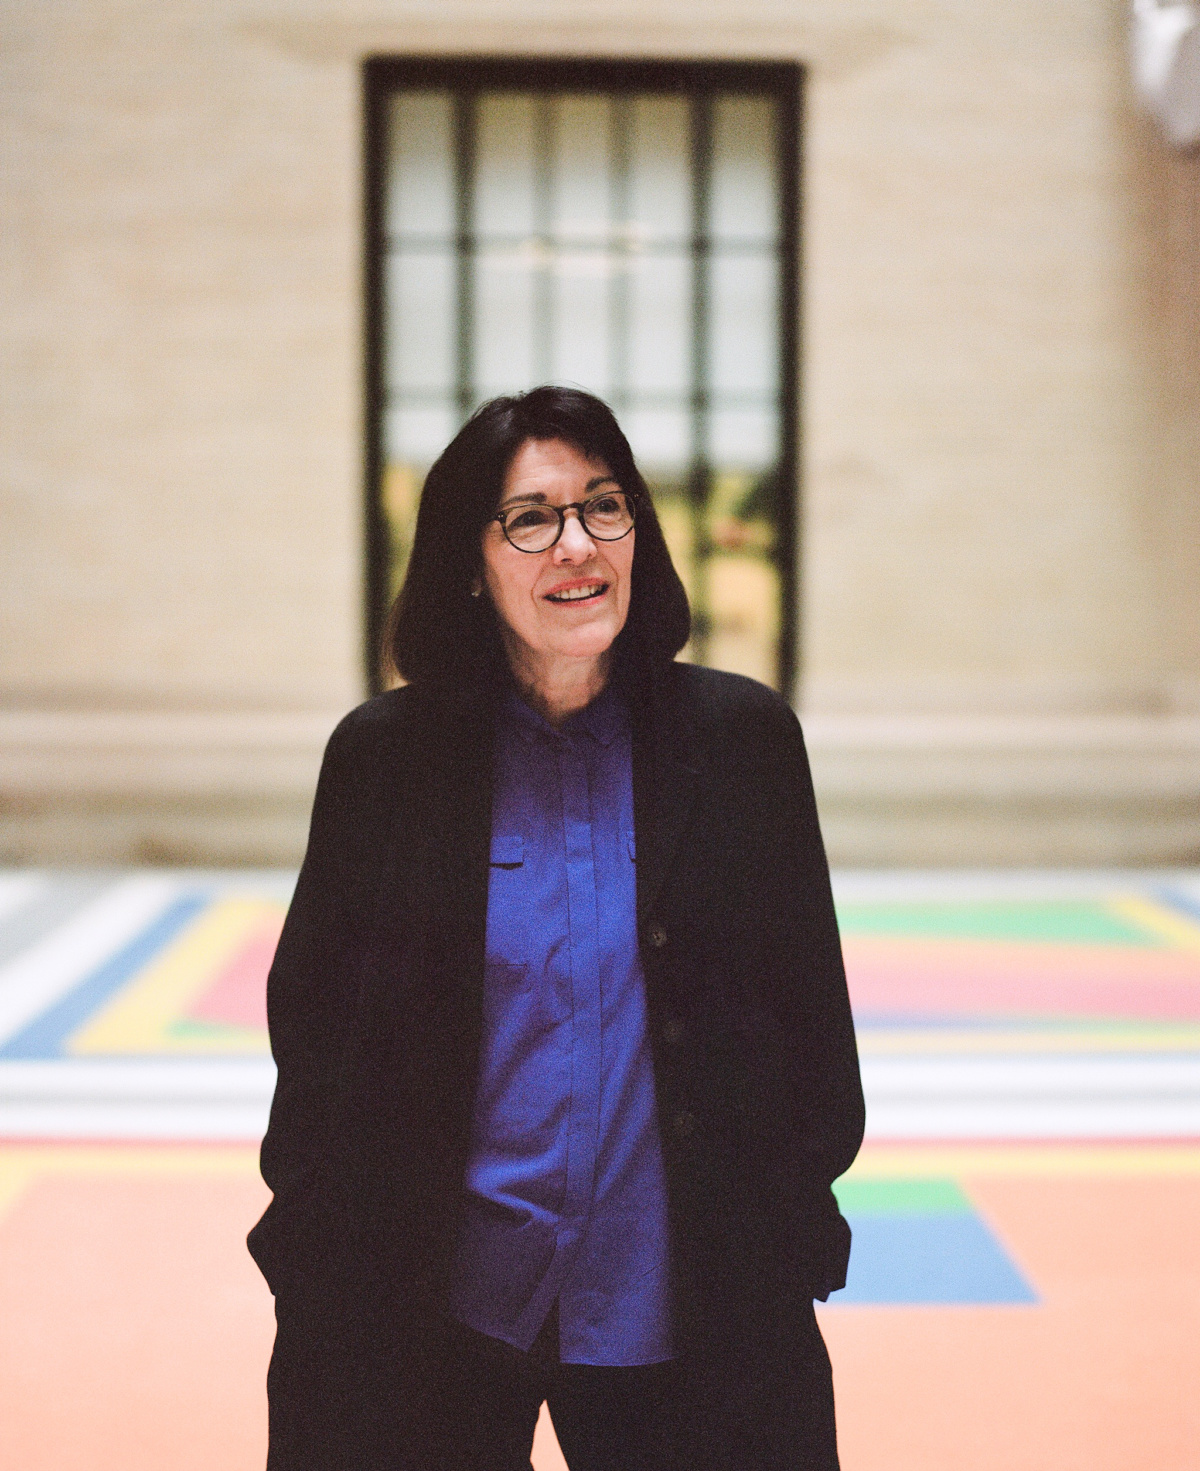 Leila Kinney stands on the colorful LeWit floor at MIT facing the camera with her hands in her pockets.